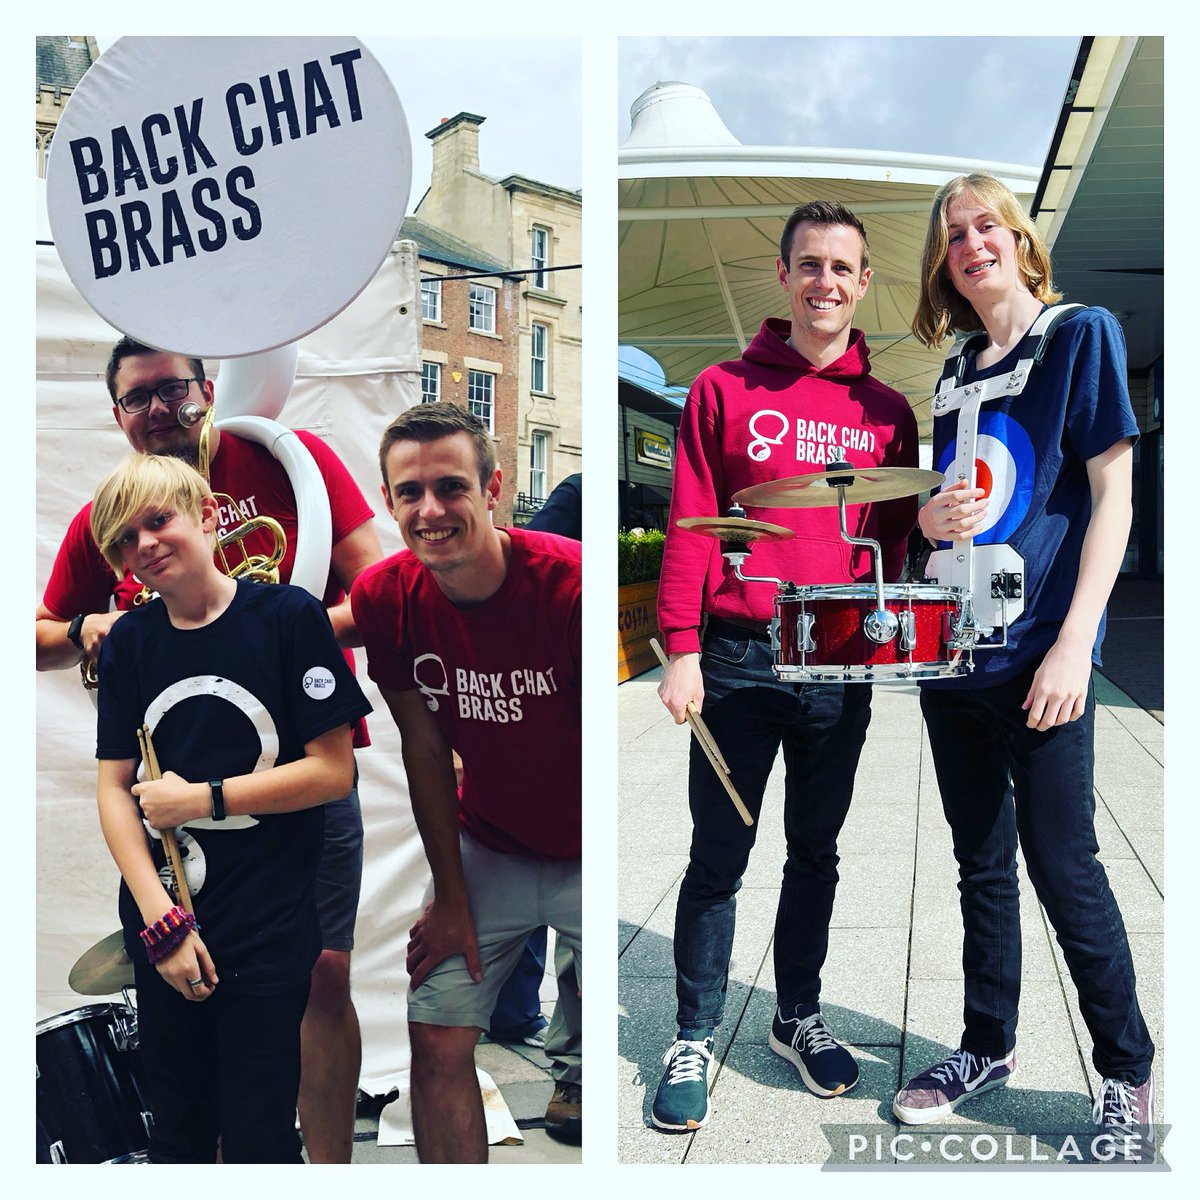 Great to see @BackChatBrass at @dalton_park today! Here’s a flashback to 2018 and a smaller @fergus_hamill 🥁